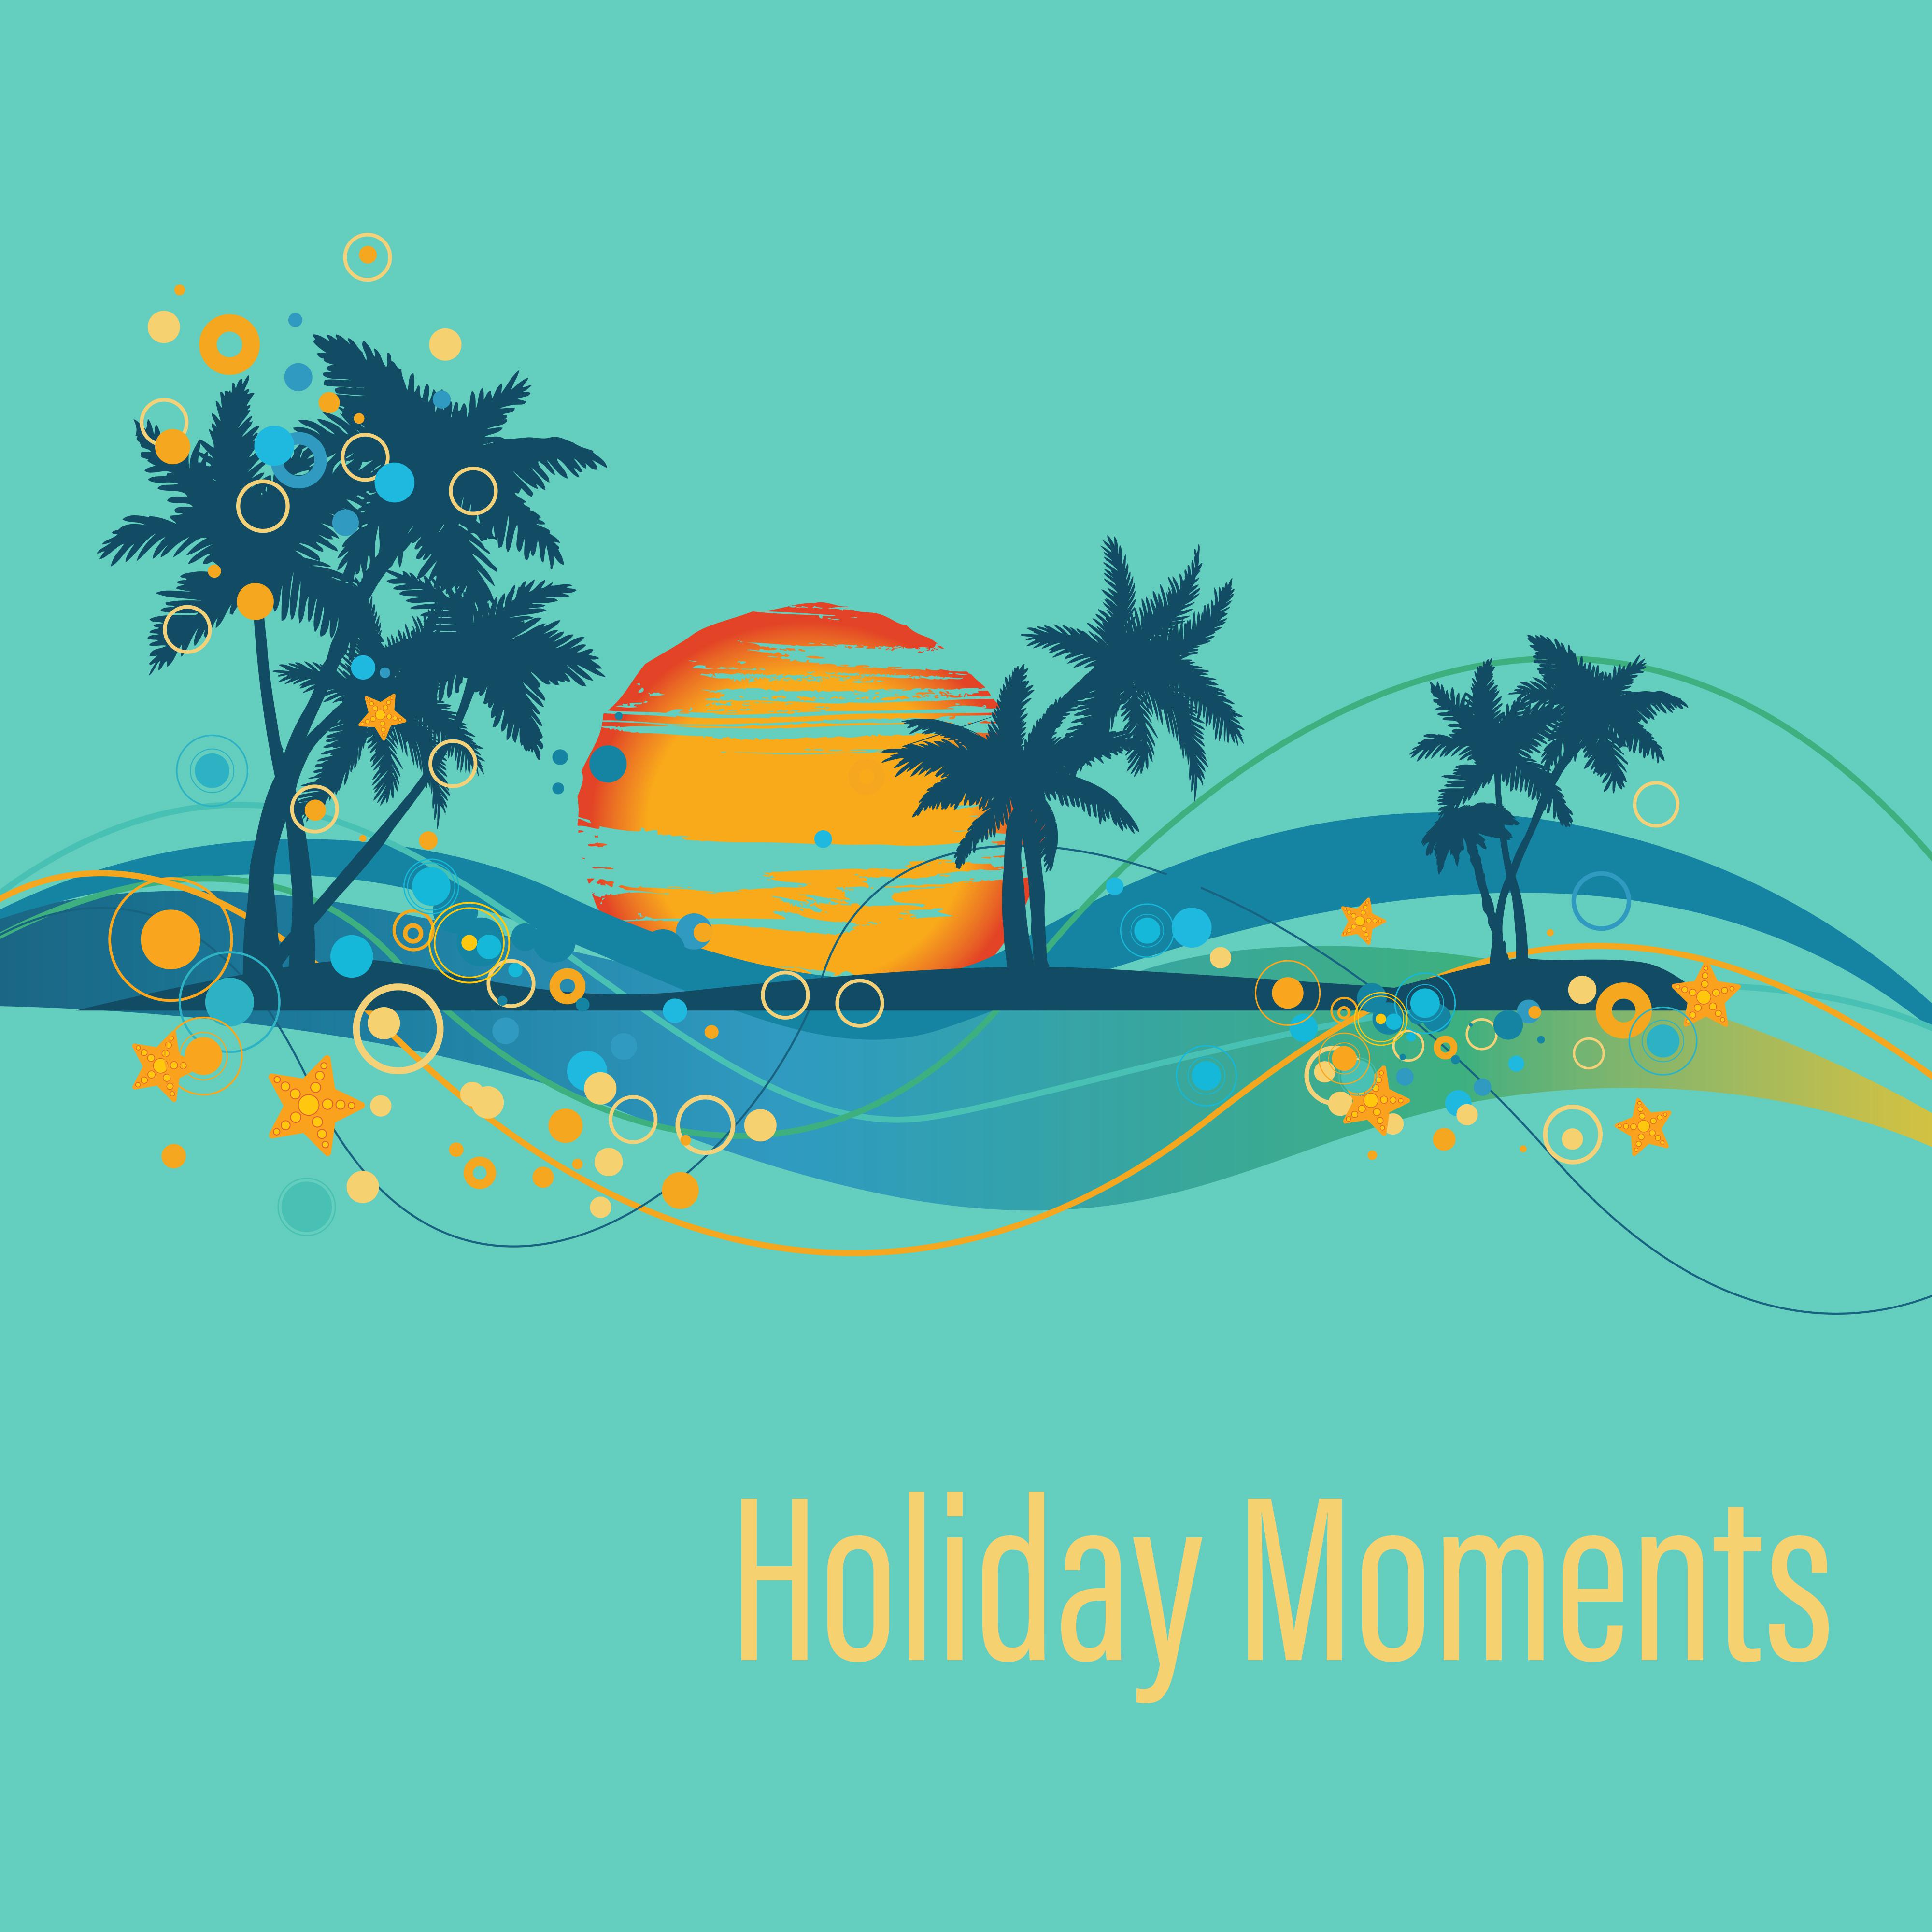 Holiday Moments - Sunny Weather, Cool Fun Party, Colorful Fireworks, Disco Music, Dance Competitions, Move Body